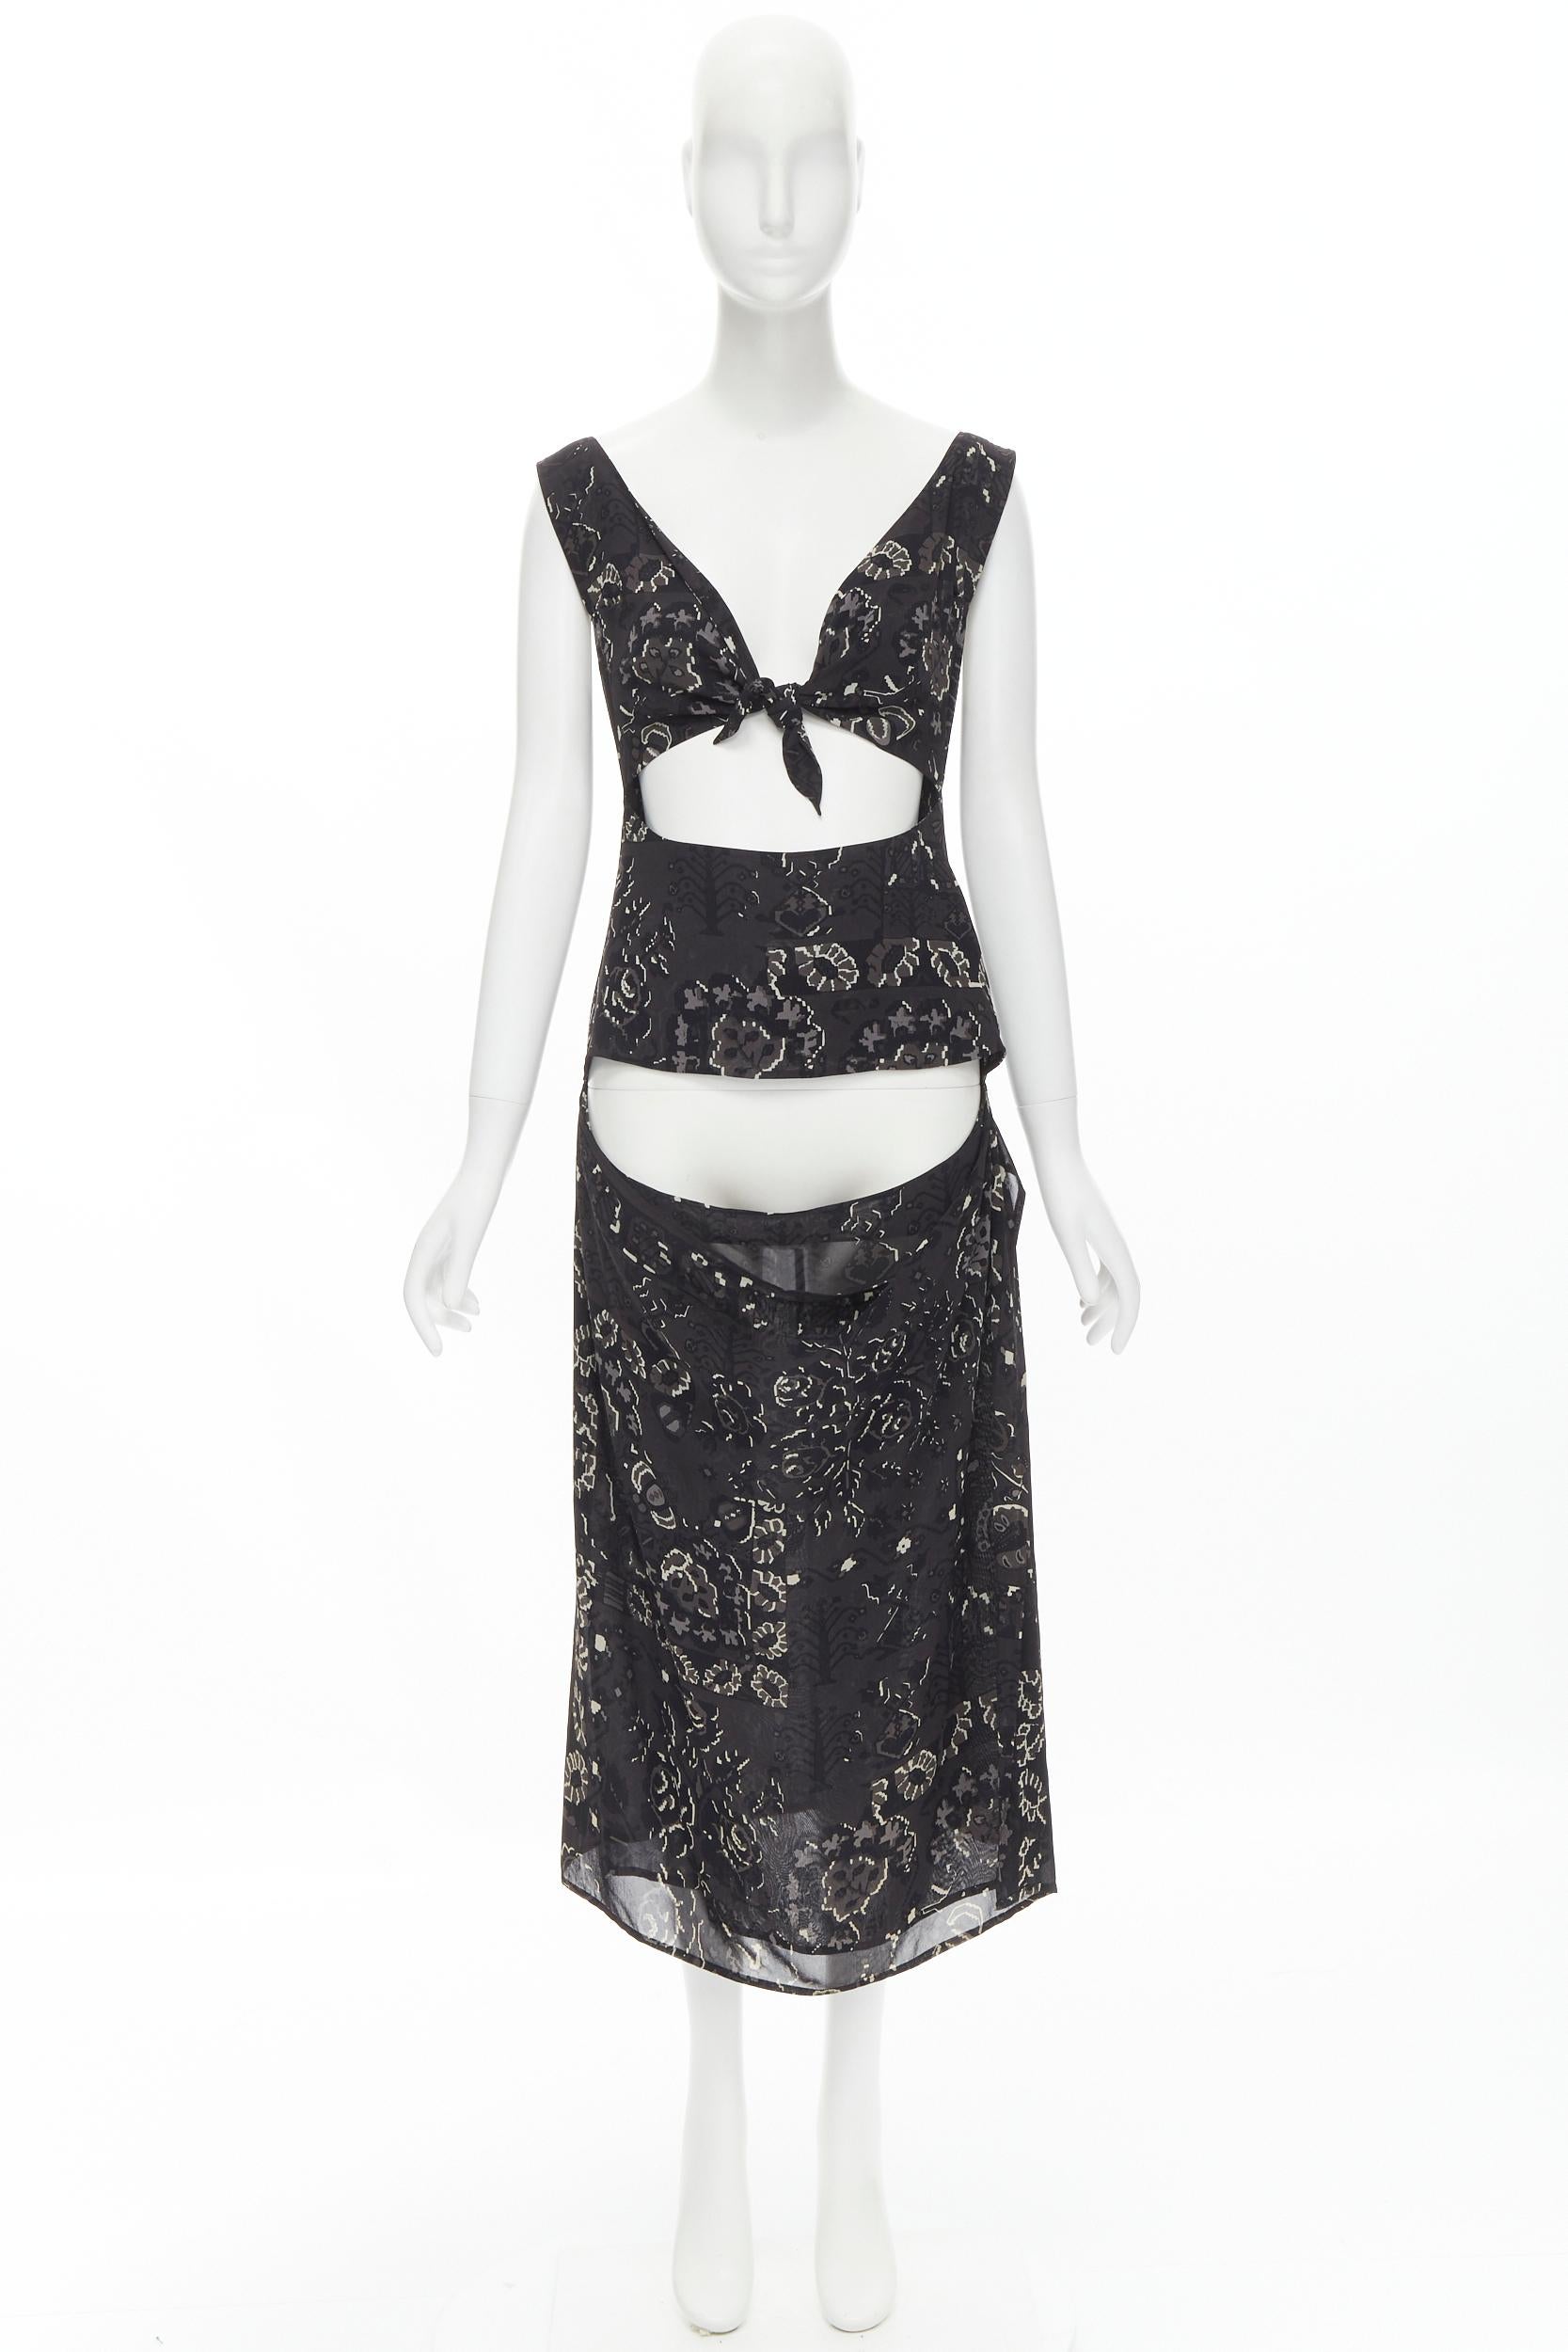 YOHJI YAMAMOTO black pixelated floral paisley print cut out draped front midi dr For Sale 3